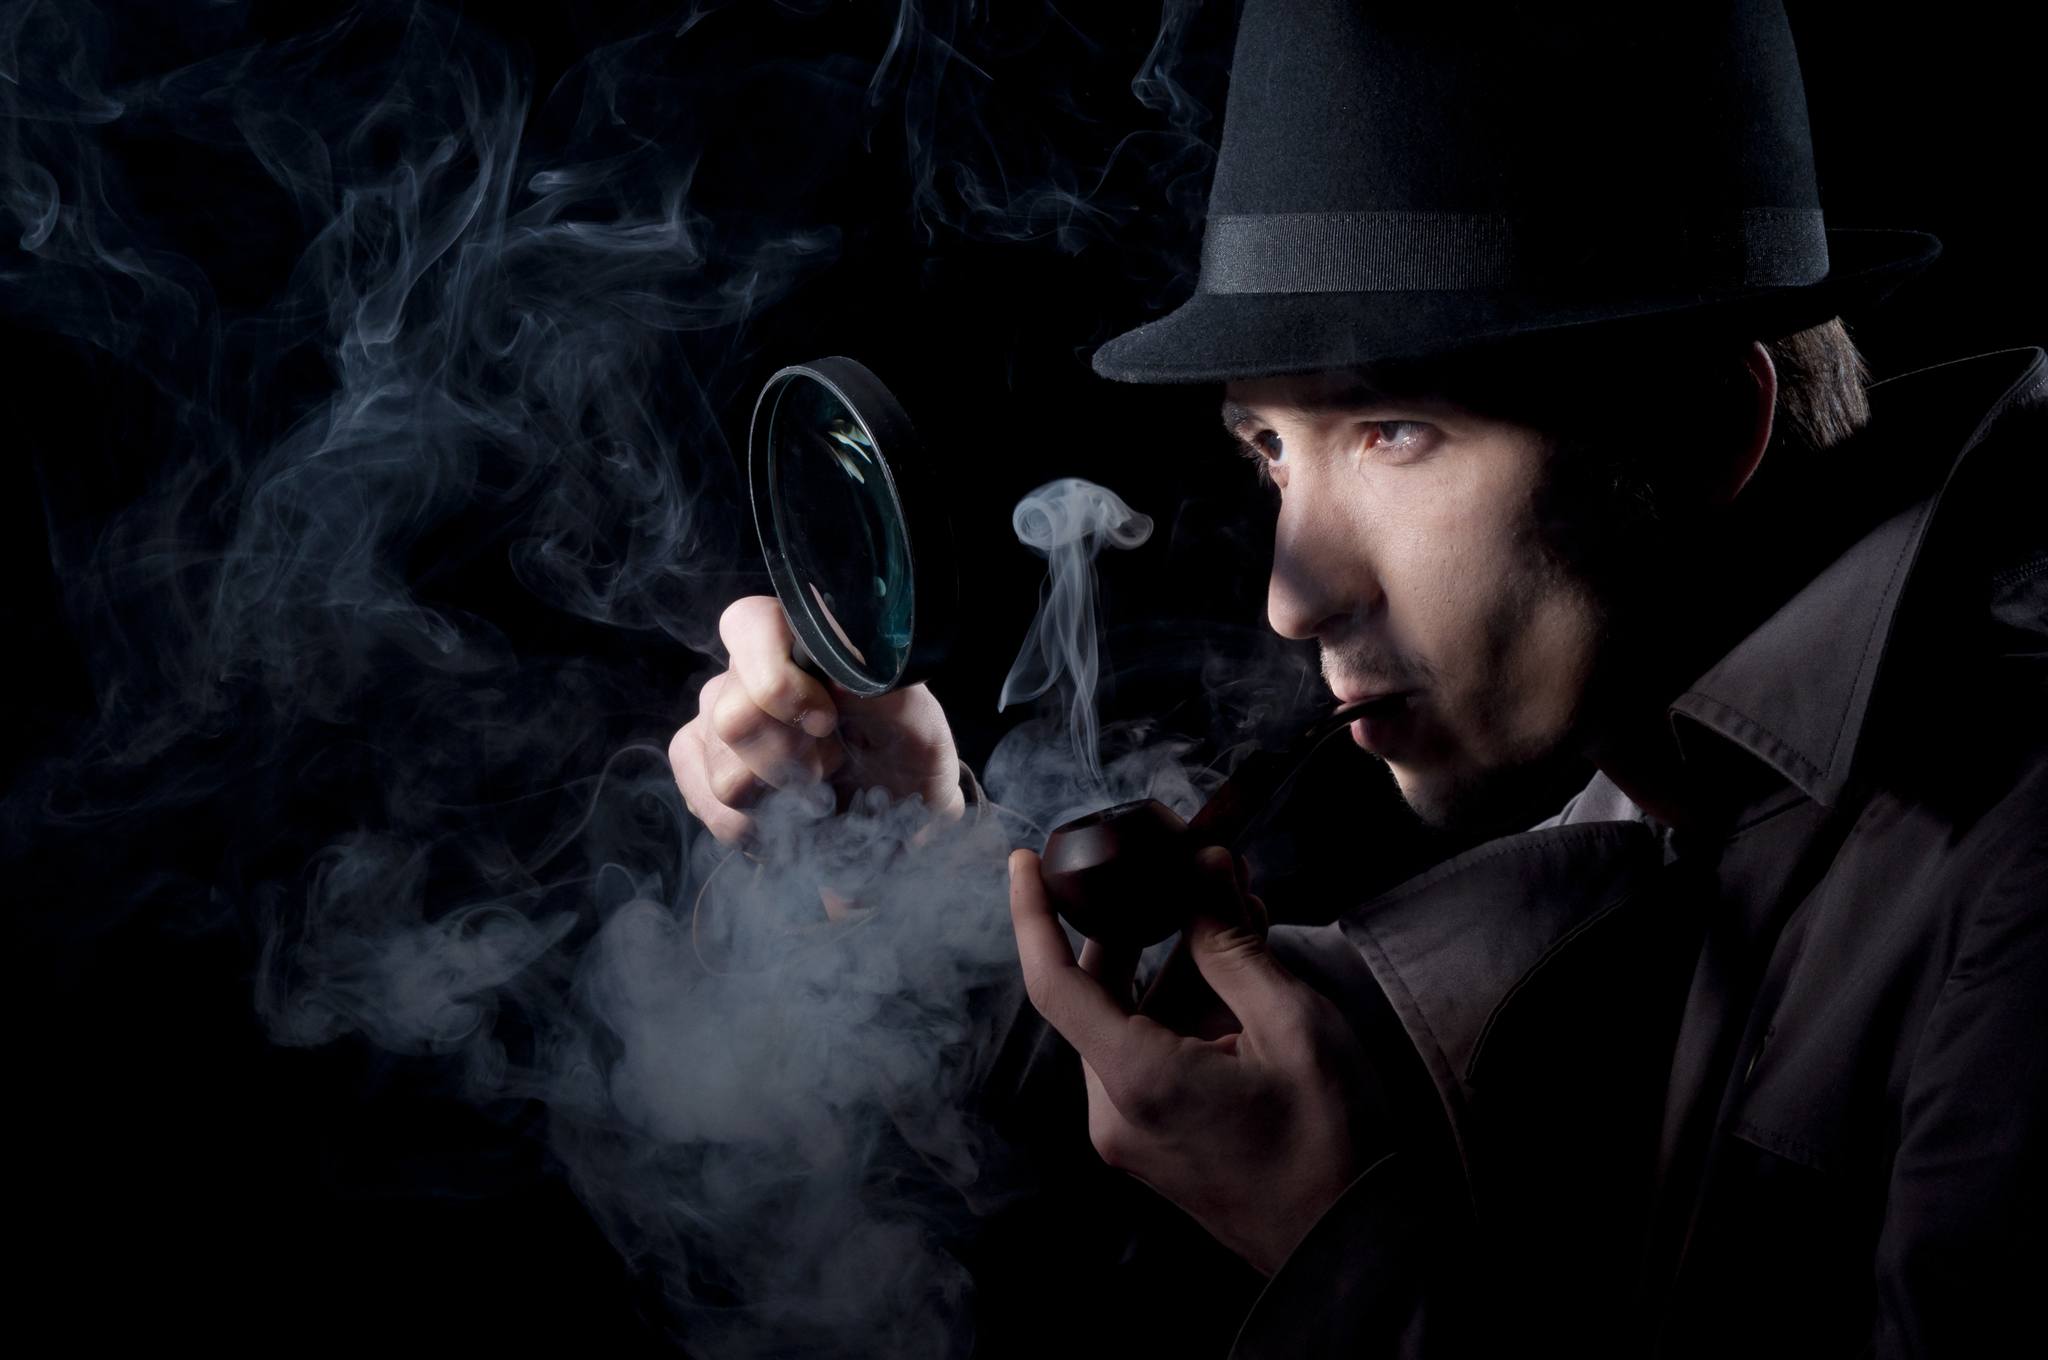 Private,Detective,Searching,For,Information,,Isolated,On,A,Black,Background